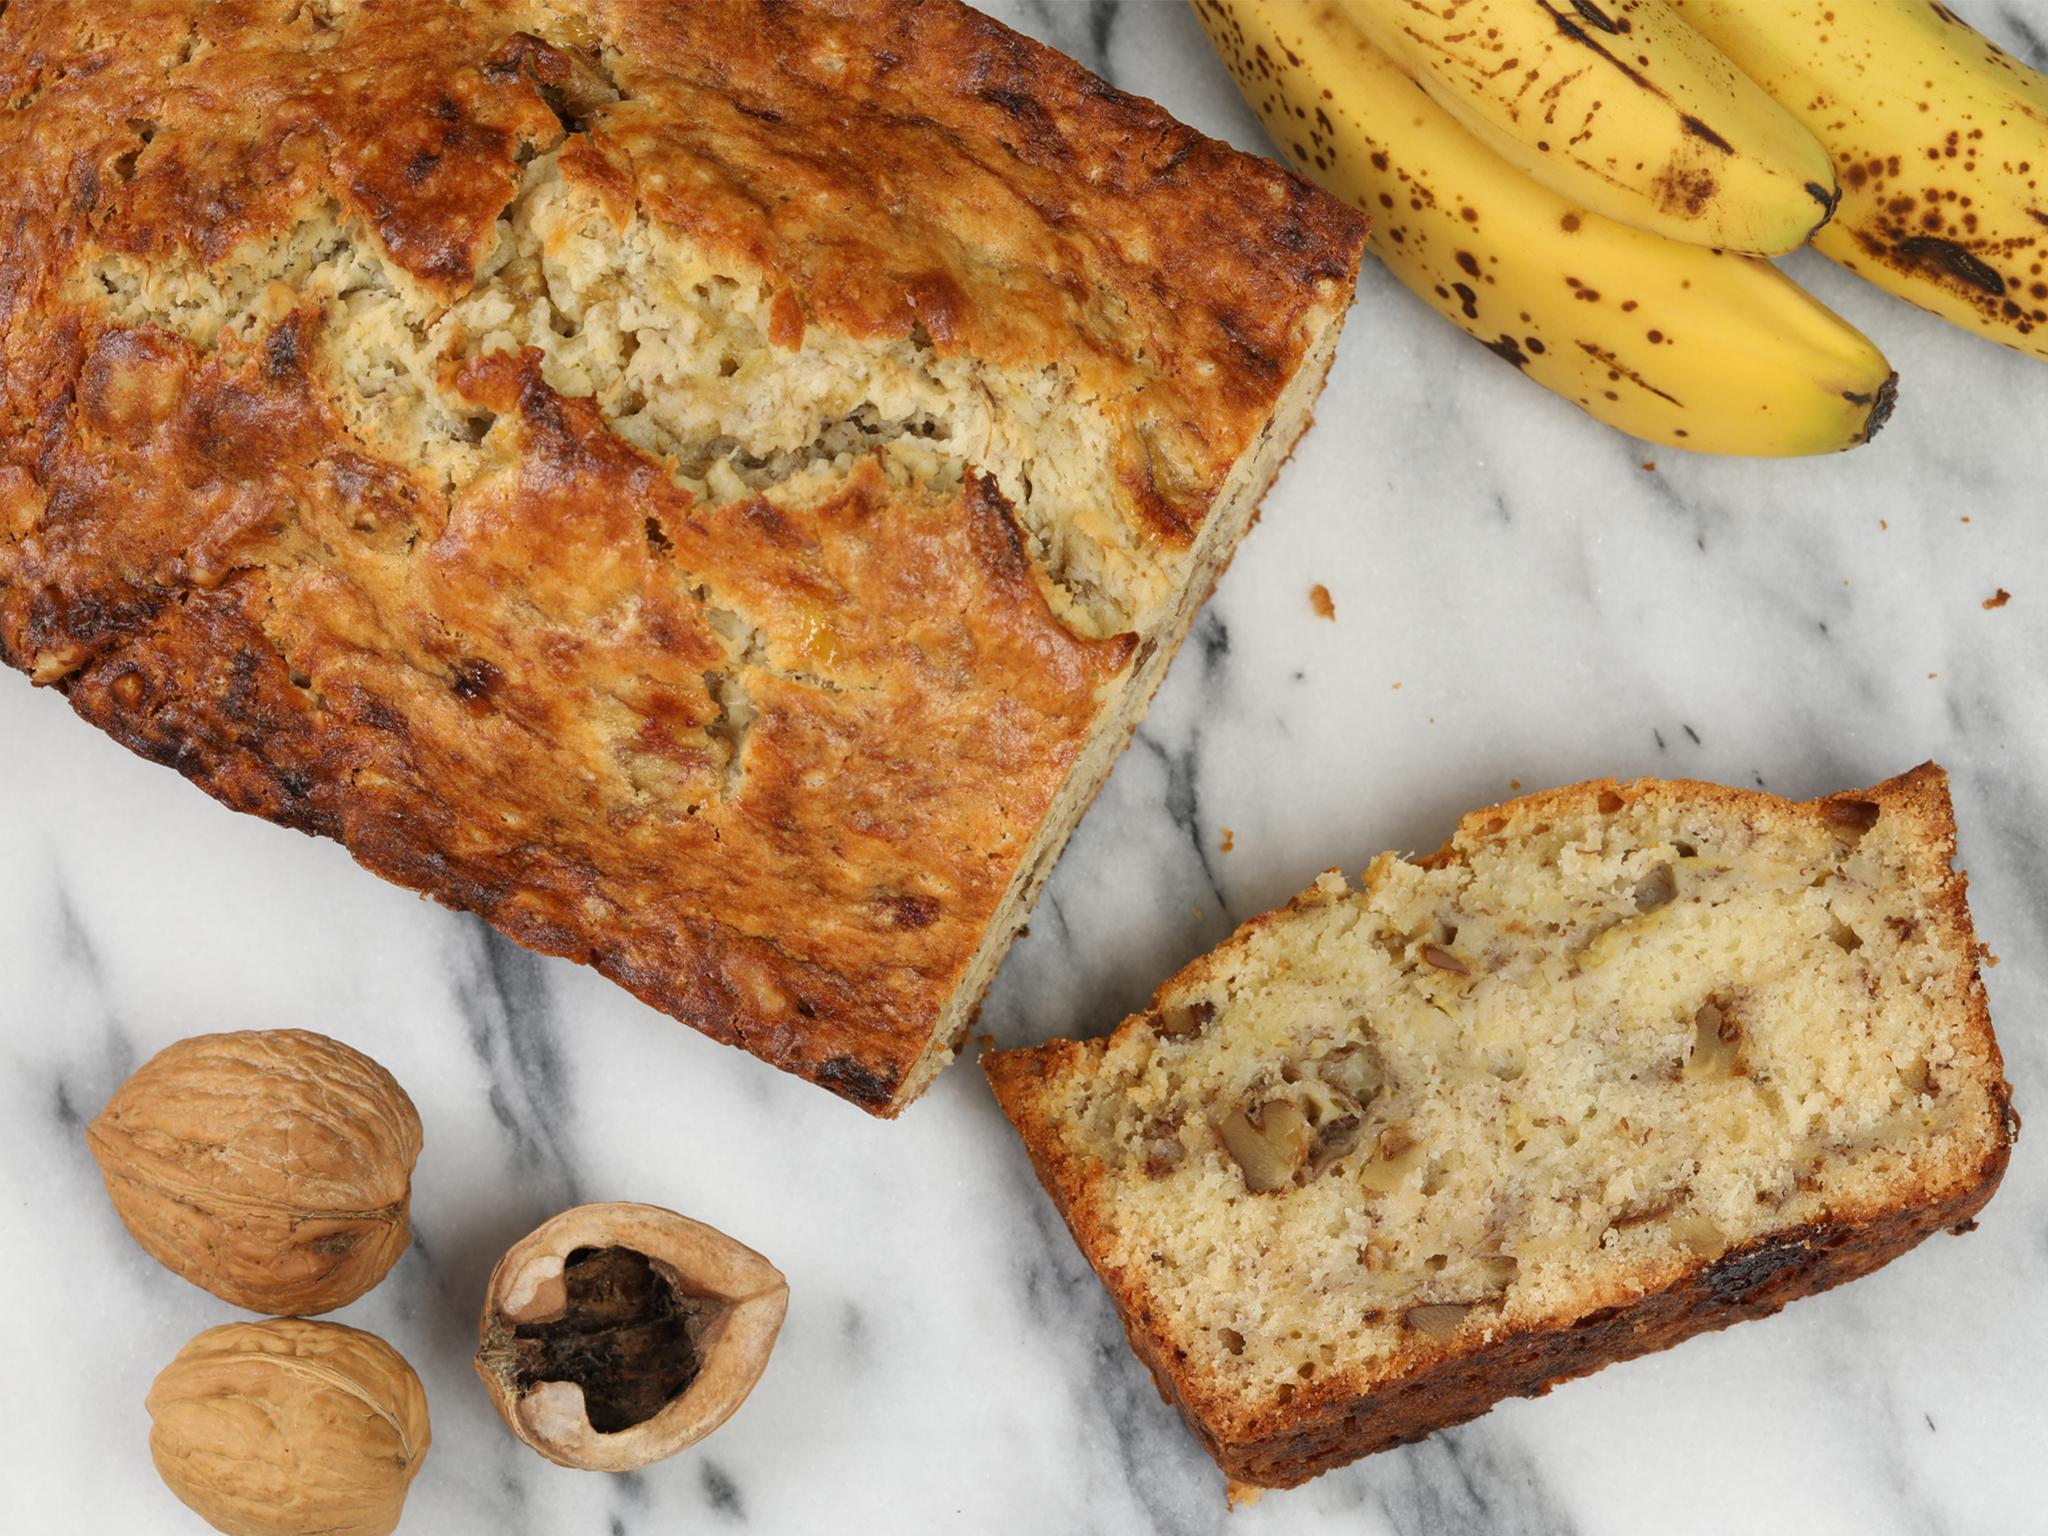 Instagram feeds are full of banana bread bakes and people trying to make sourdough for the first time